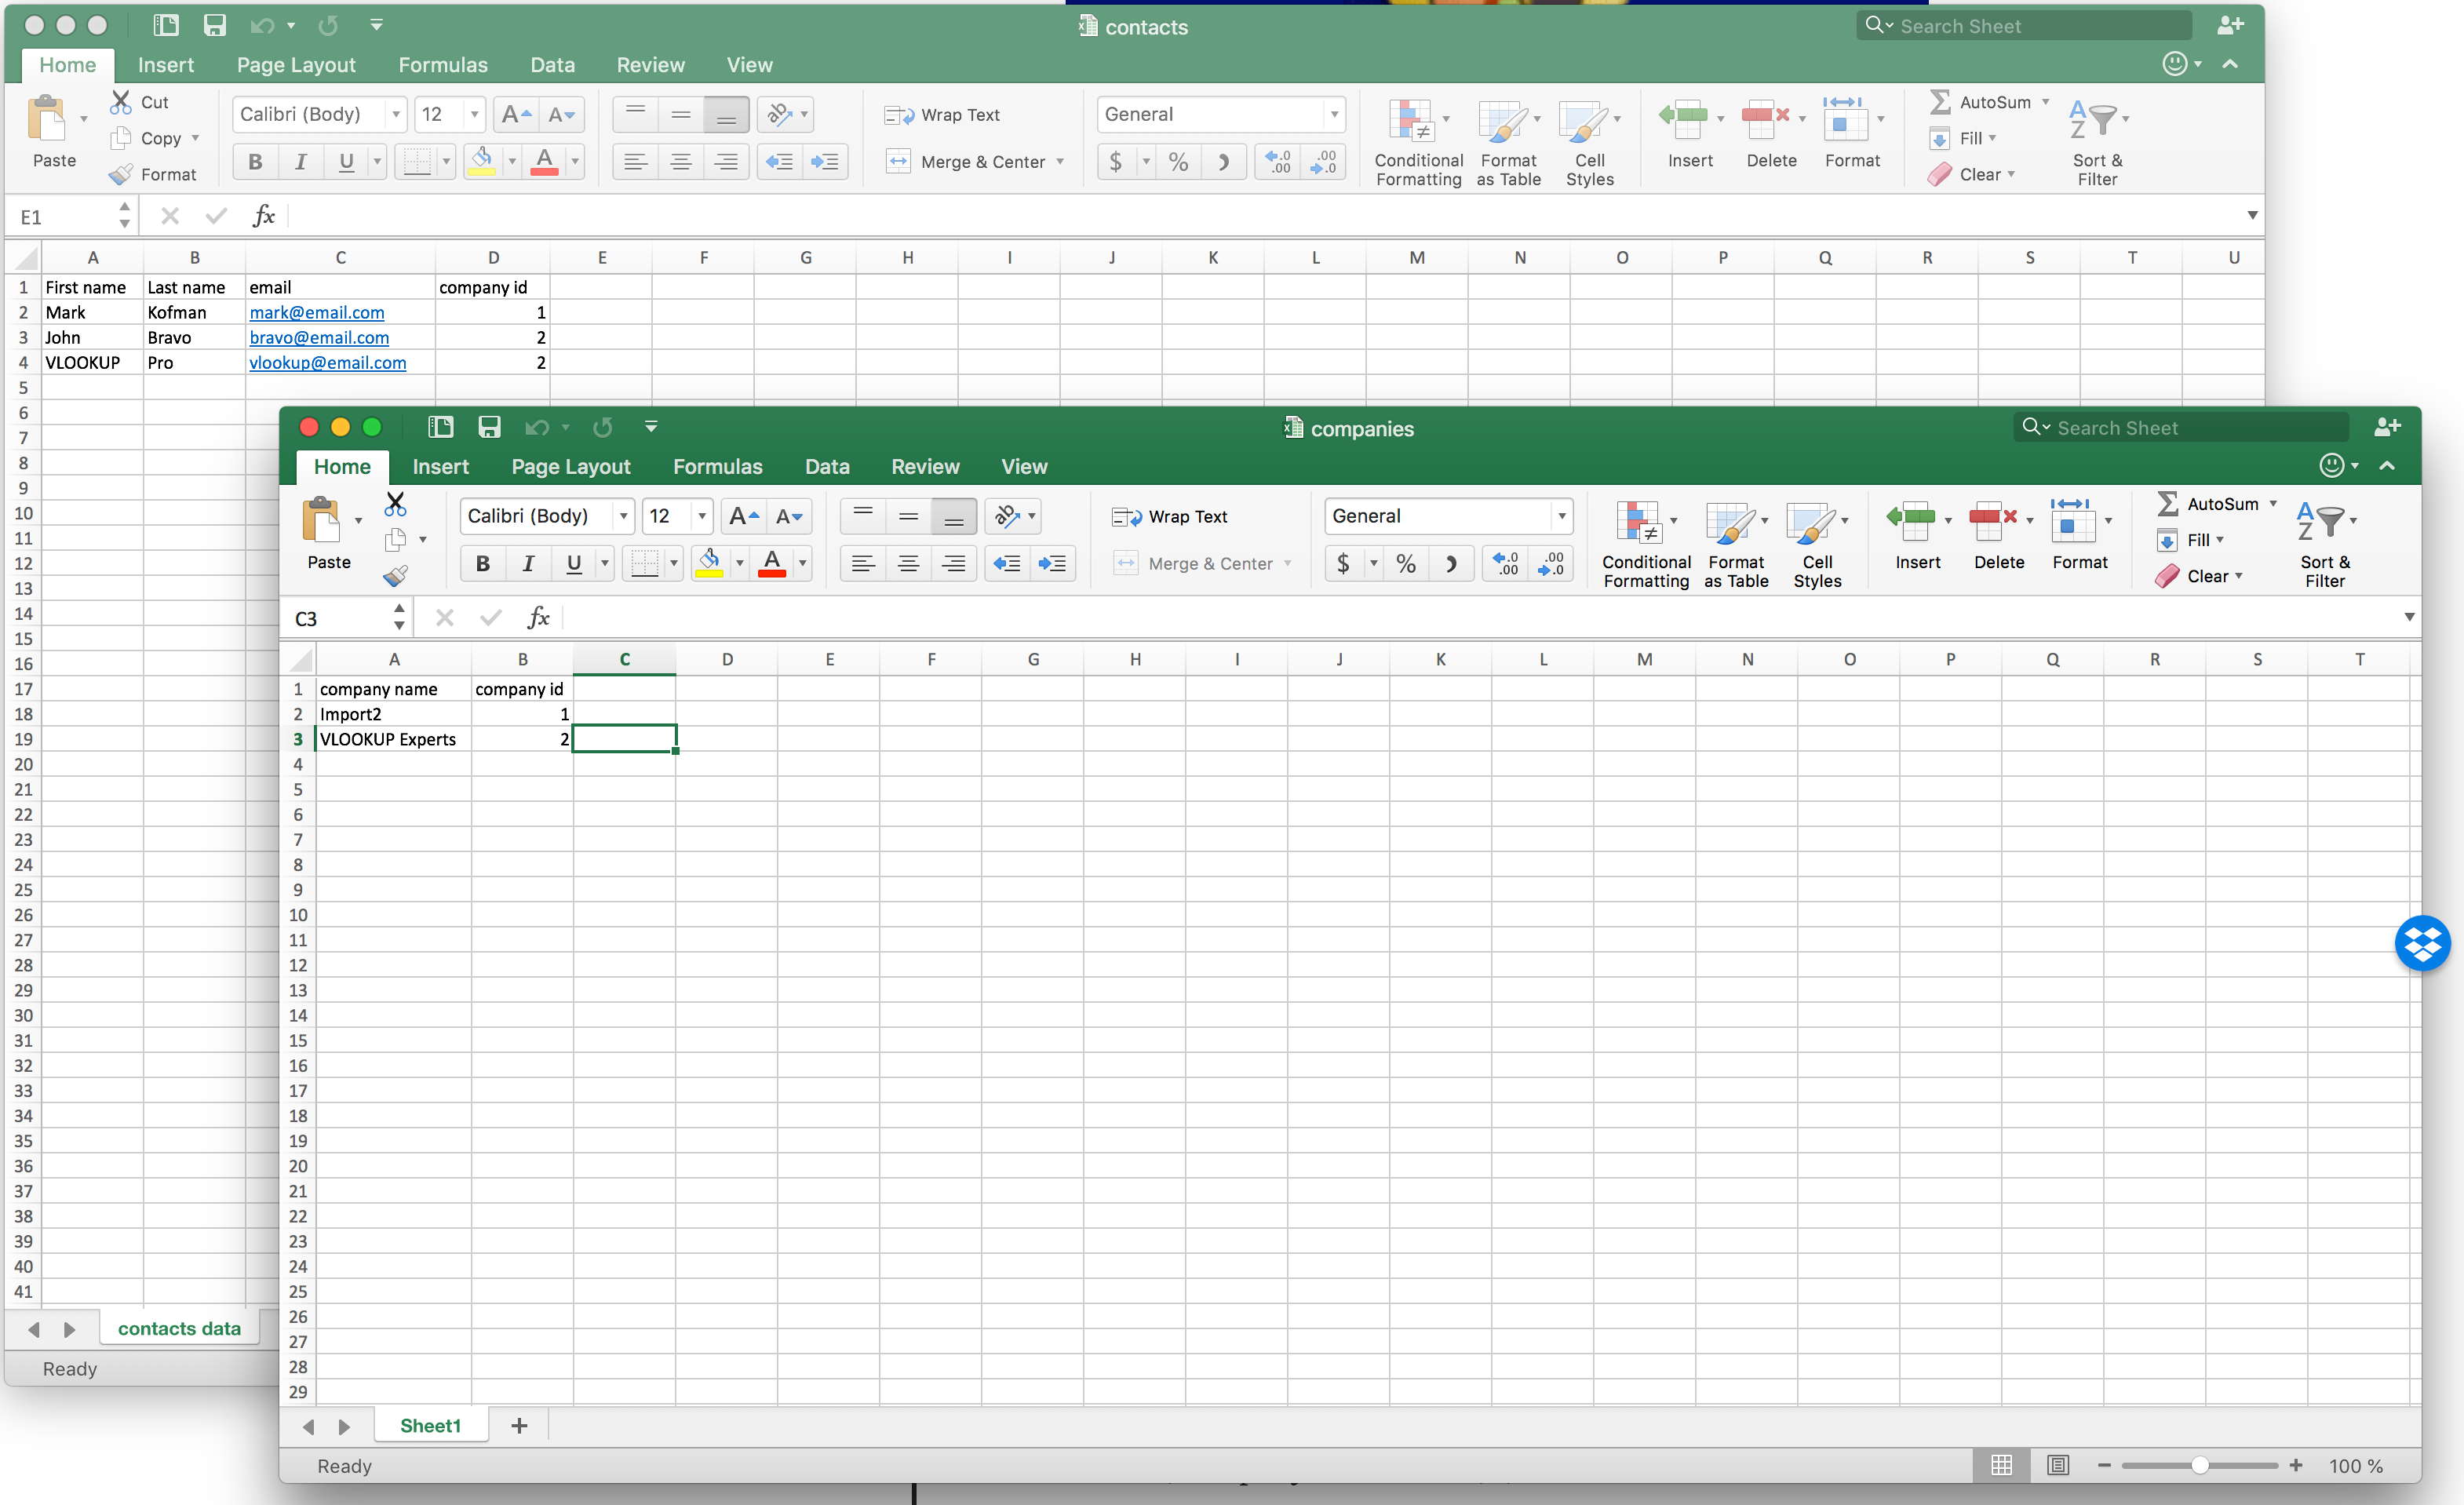 Join Multiple Data Sheets In Excel Using Vlookup Function